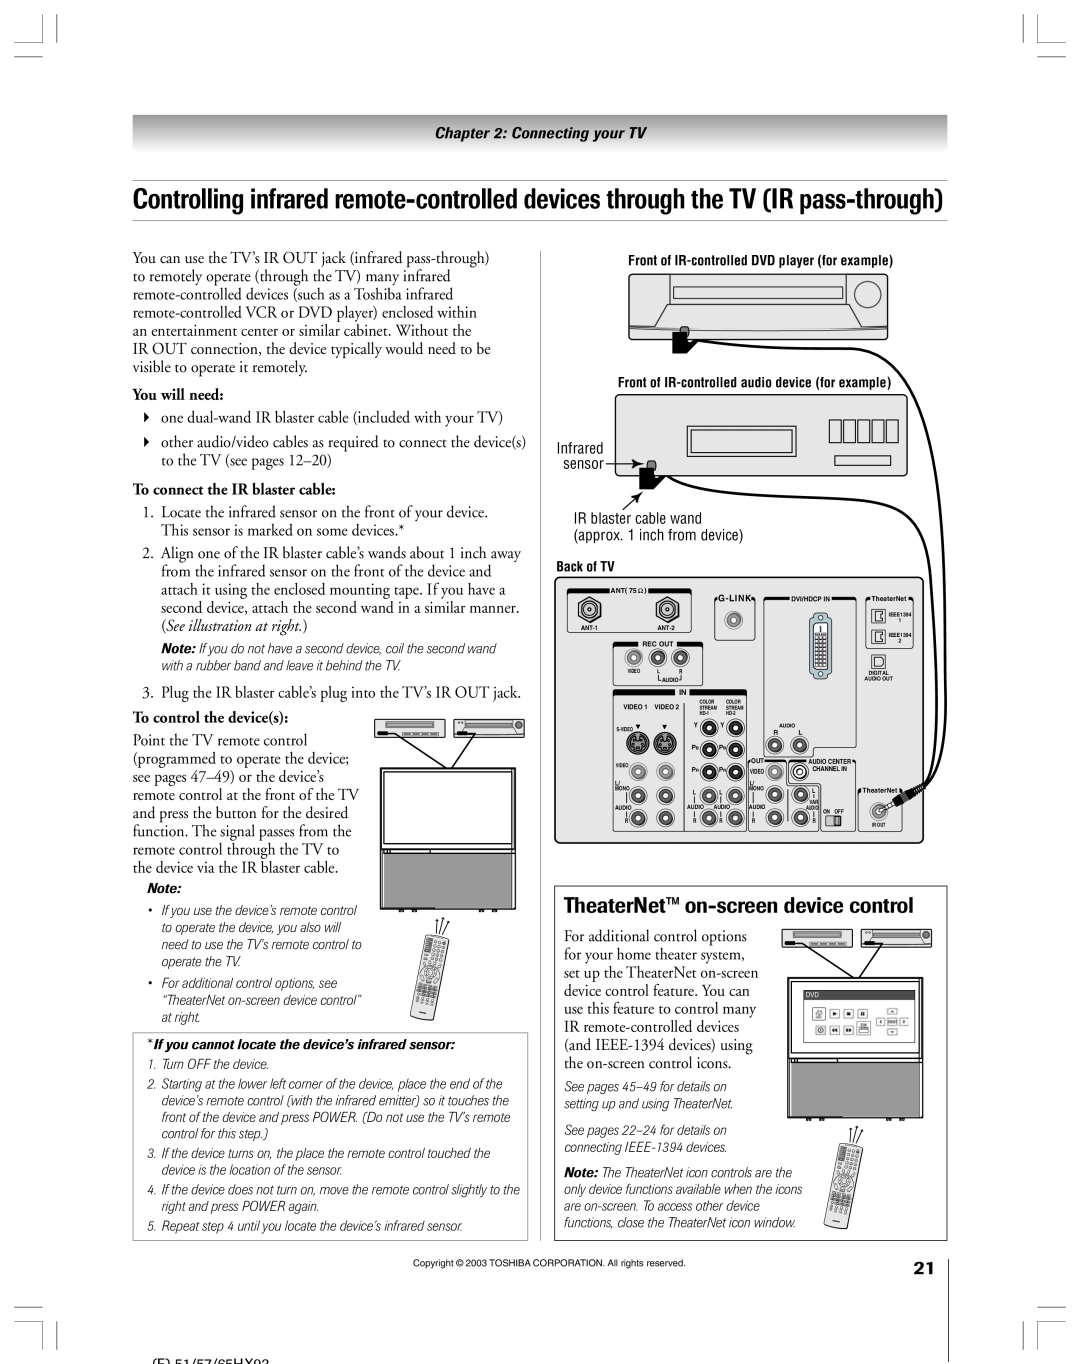 Toshiba 51HX93 TheaterNet on-screen device control, To connect the IR blaster cable, To control the devices, You will need 